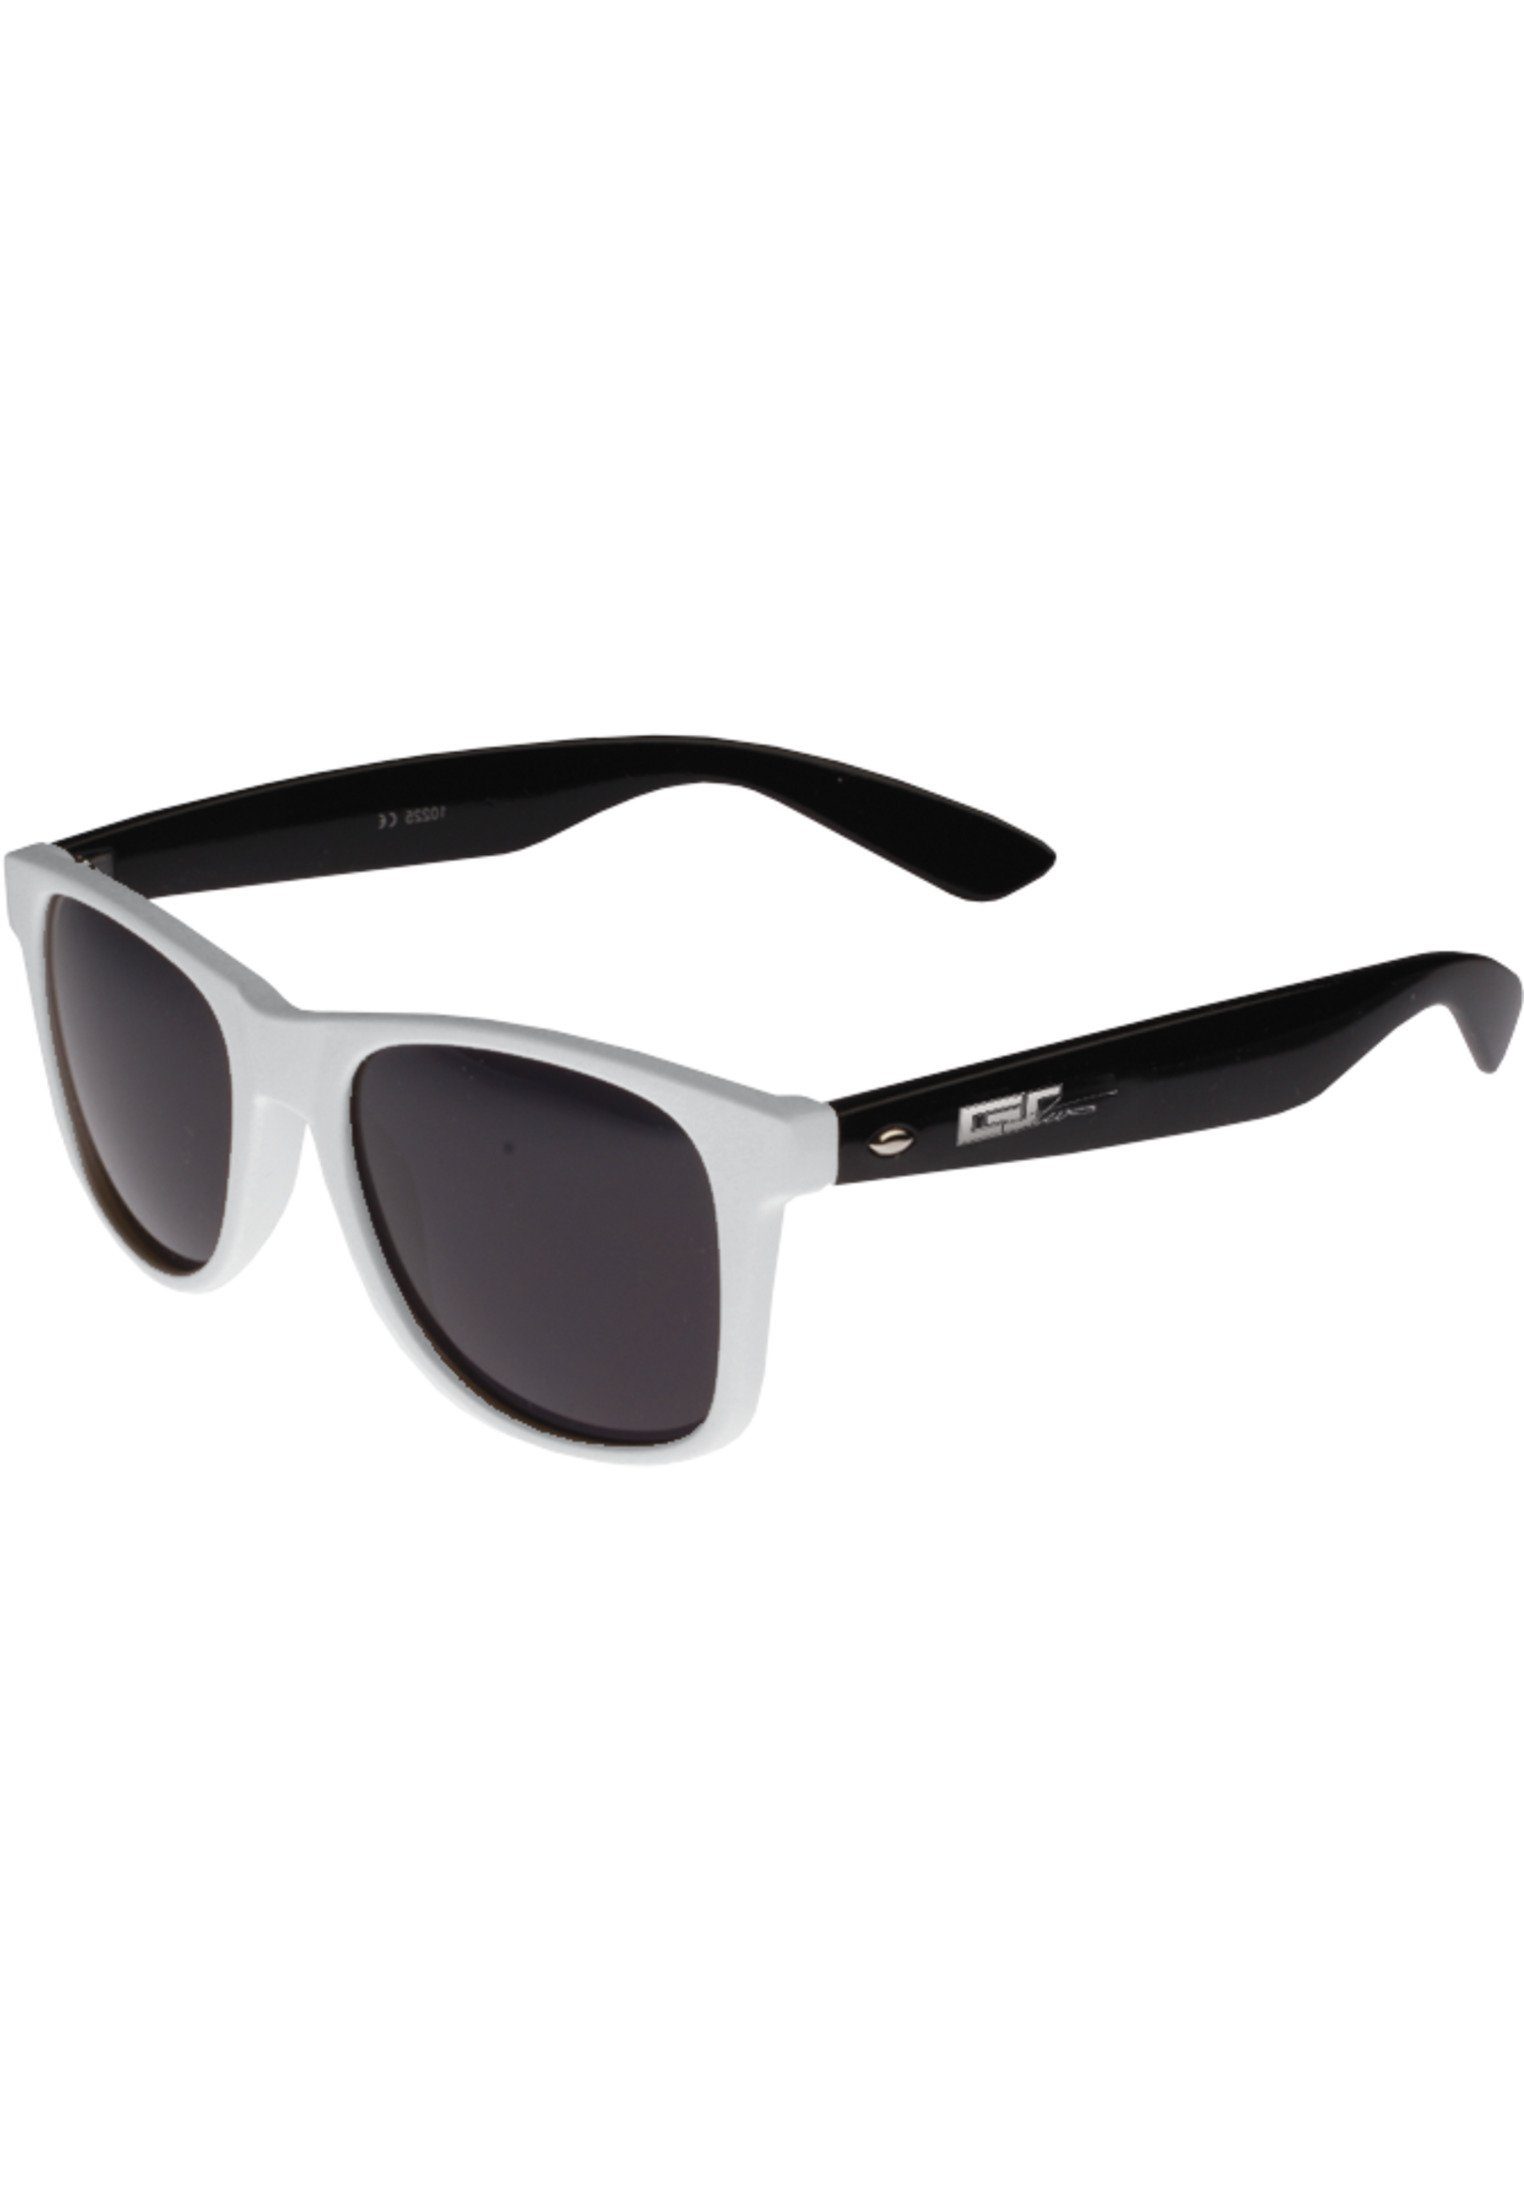 Groove Accessoires Sonnenbrille GStwo MSTRDS white/black Shades